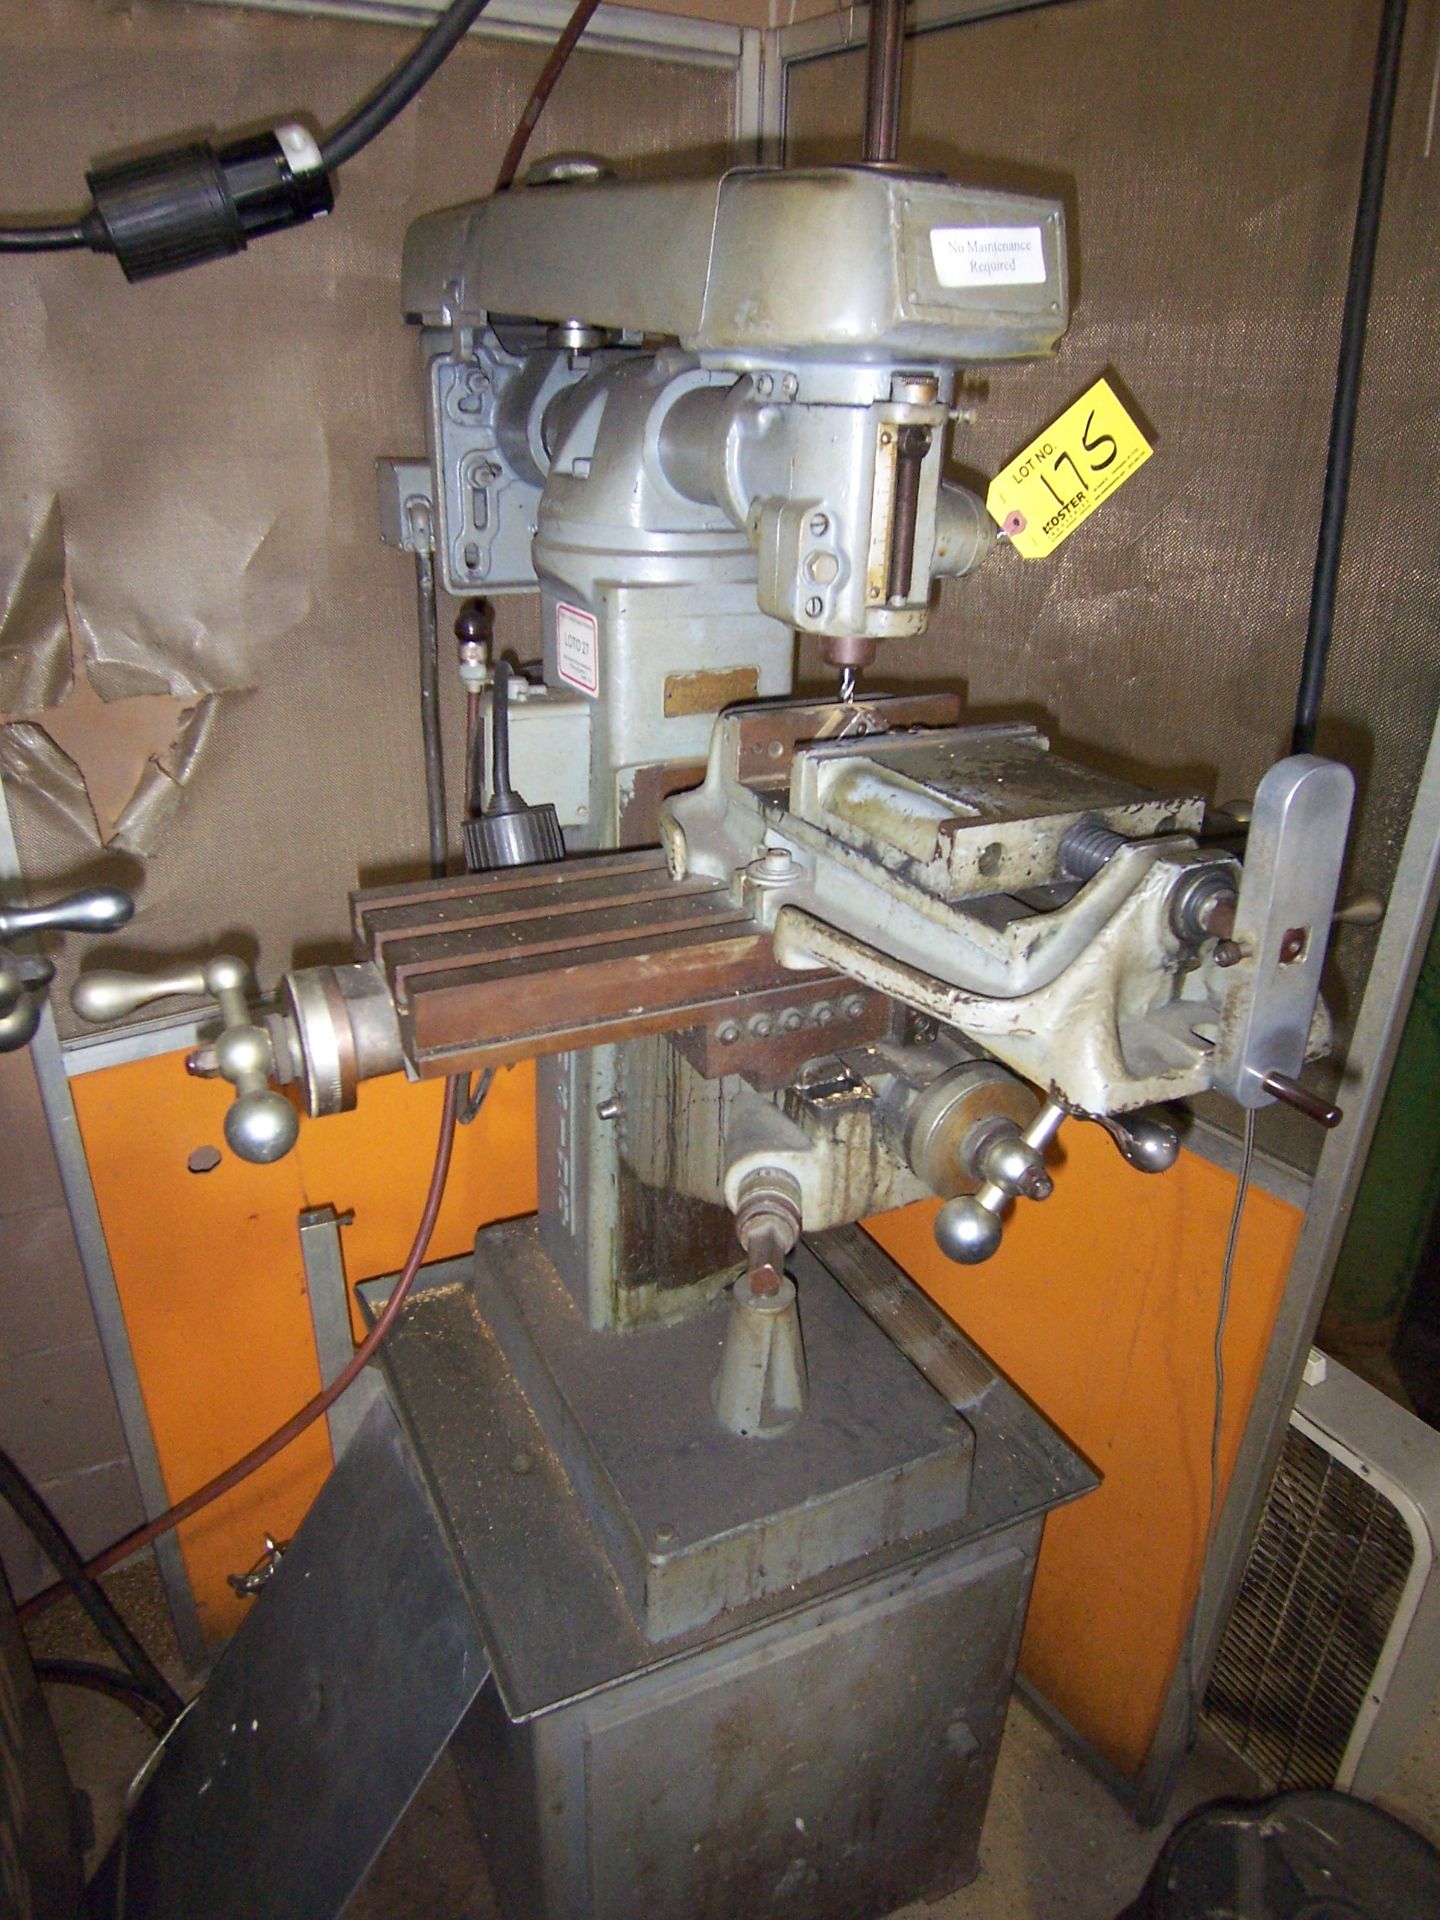 CLAUSING MDL. 8250 VERTICAL KNEE TYPE MILLING MACHINE, WITH STEP PULLEY SPEED CHANGE, #2MT TAPER, 6" - Image 2 of 2